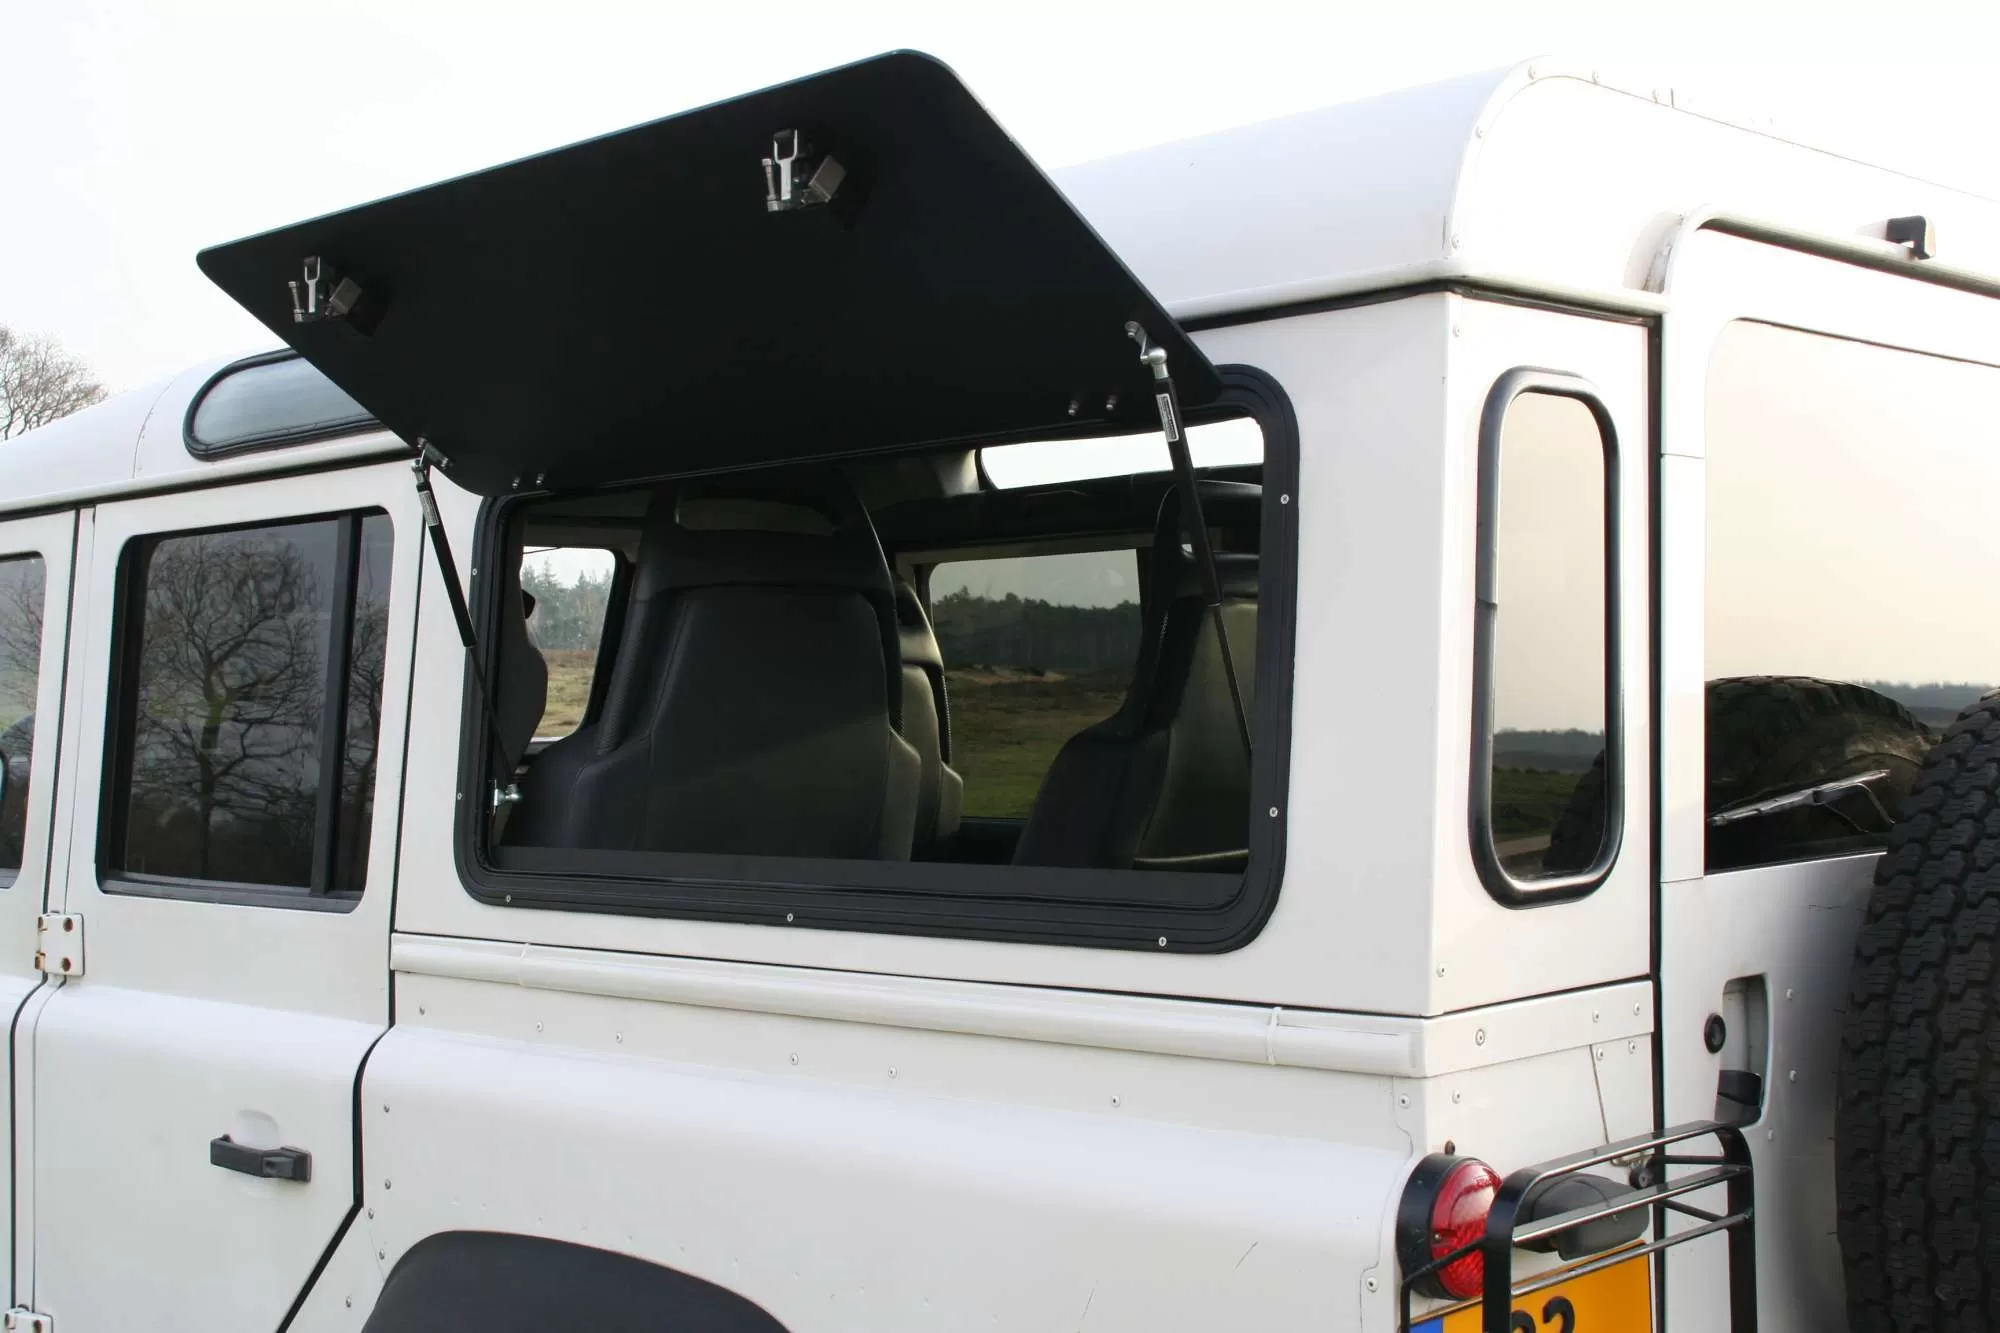 Open Aluminium Gullwing Window by Explore Glazing on a Land Rover Defender.